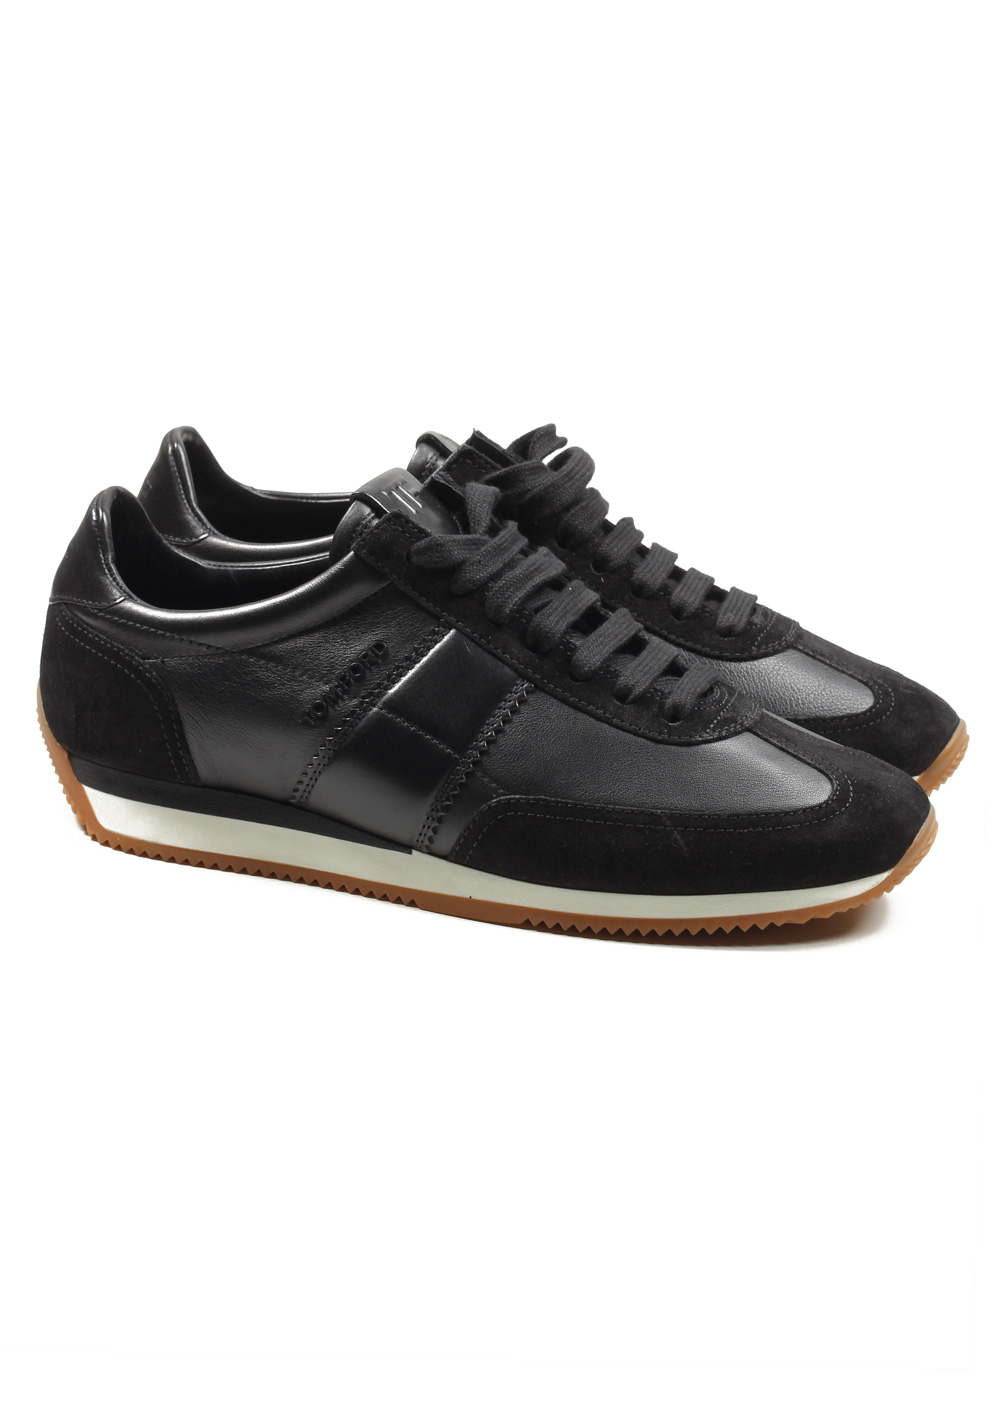 TOM FORD Orford Colorblock Suede Black Trainer Sneaker Shoes Size 9.5 UK / 10.5 U.S. | Costume Limité